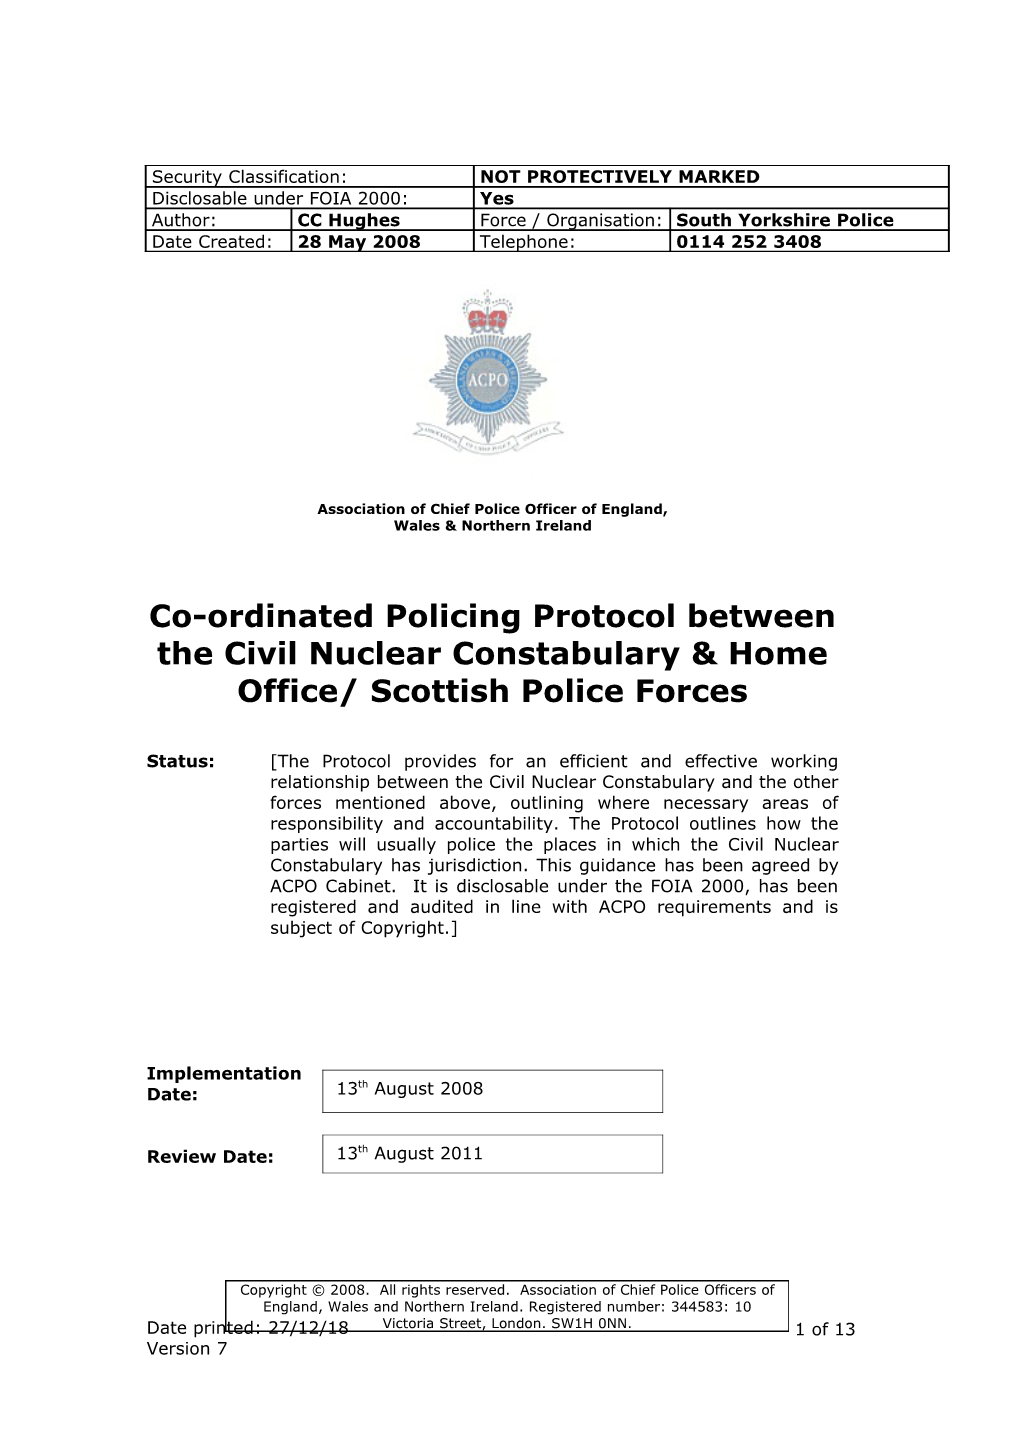 Coordinated Policing Protocol Between CNC and HO/Scottish Forces